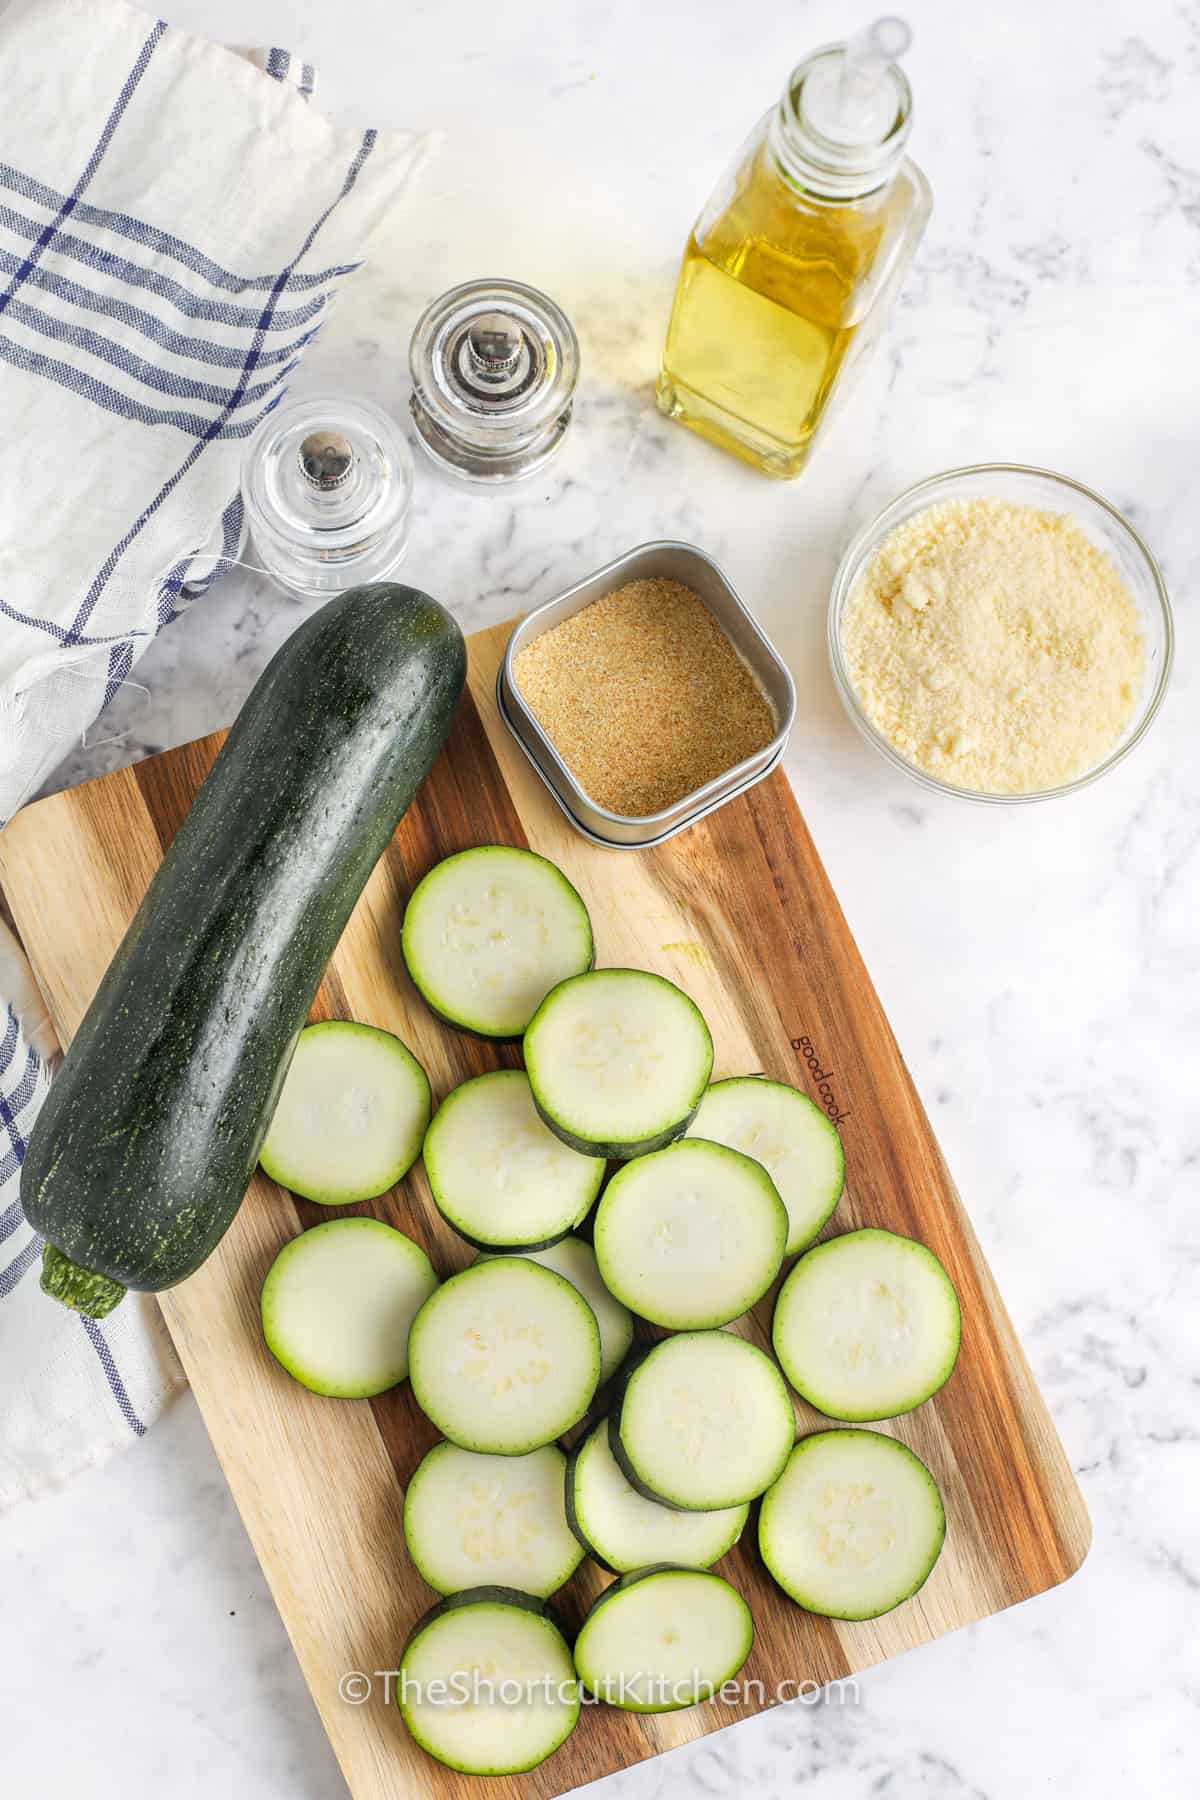 ingredients to make Oven Baked Parmesan Zucchini